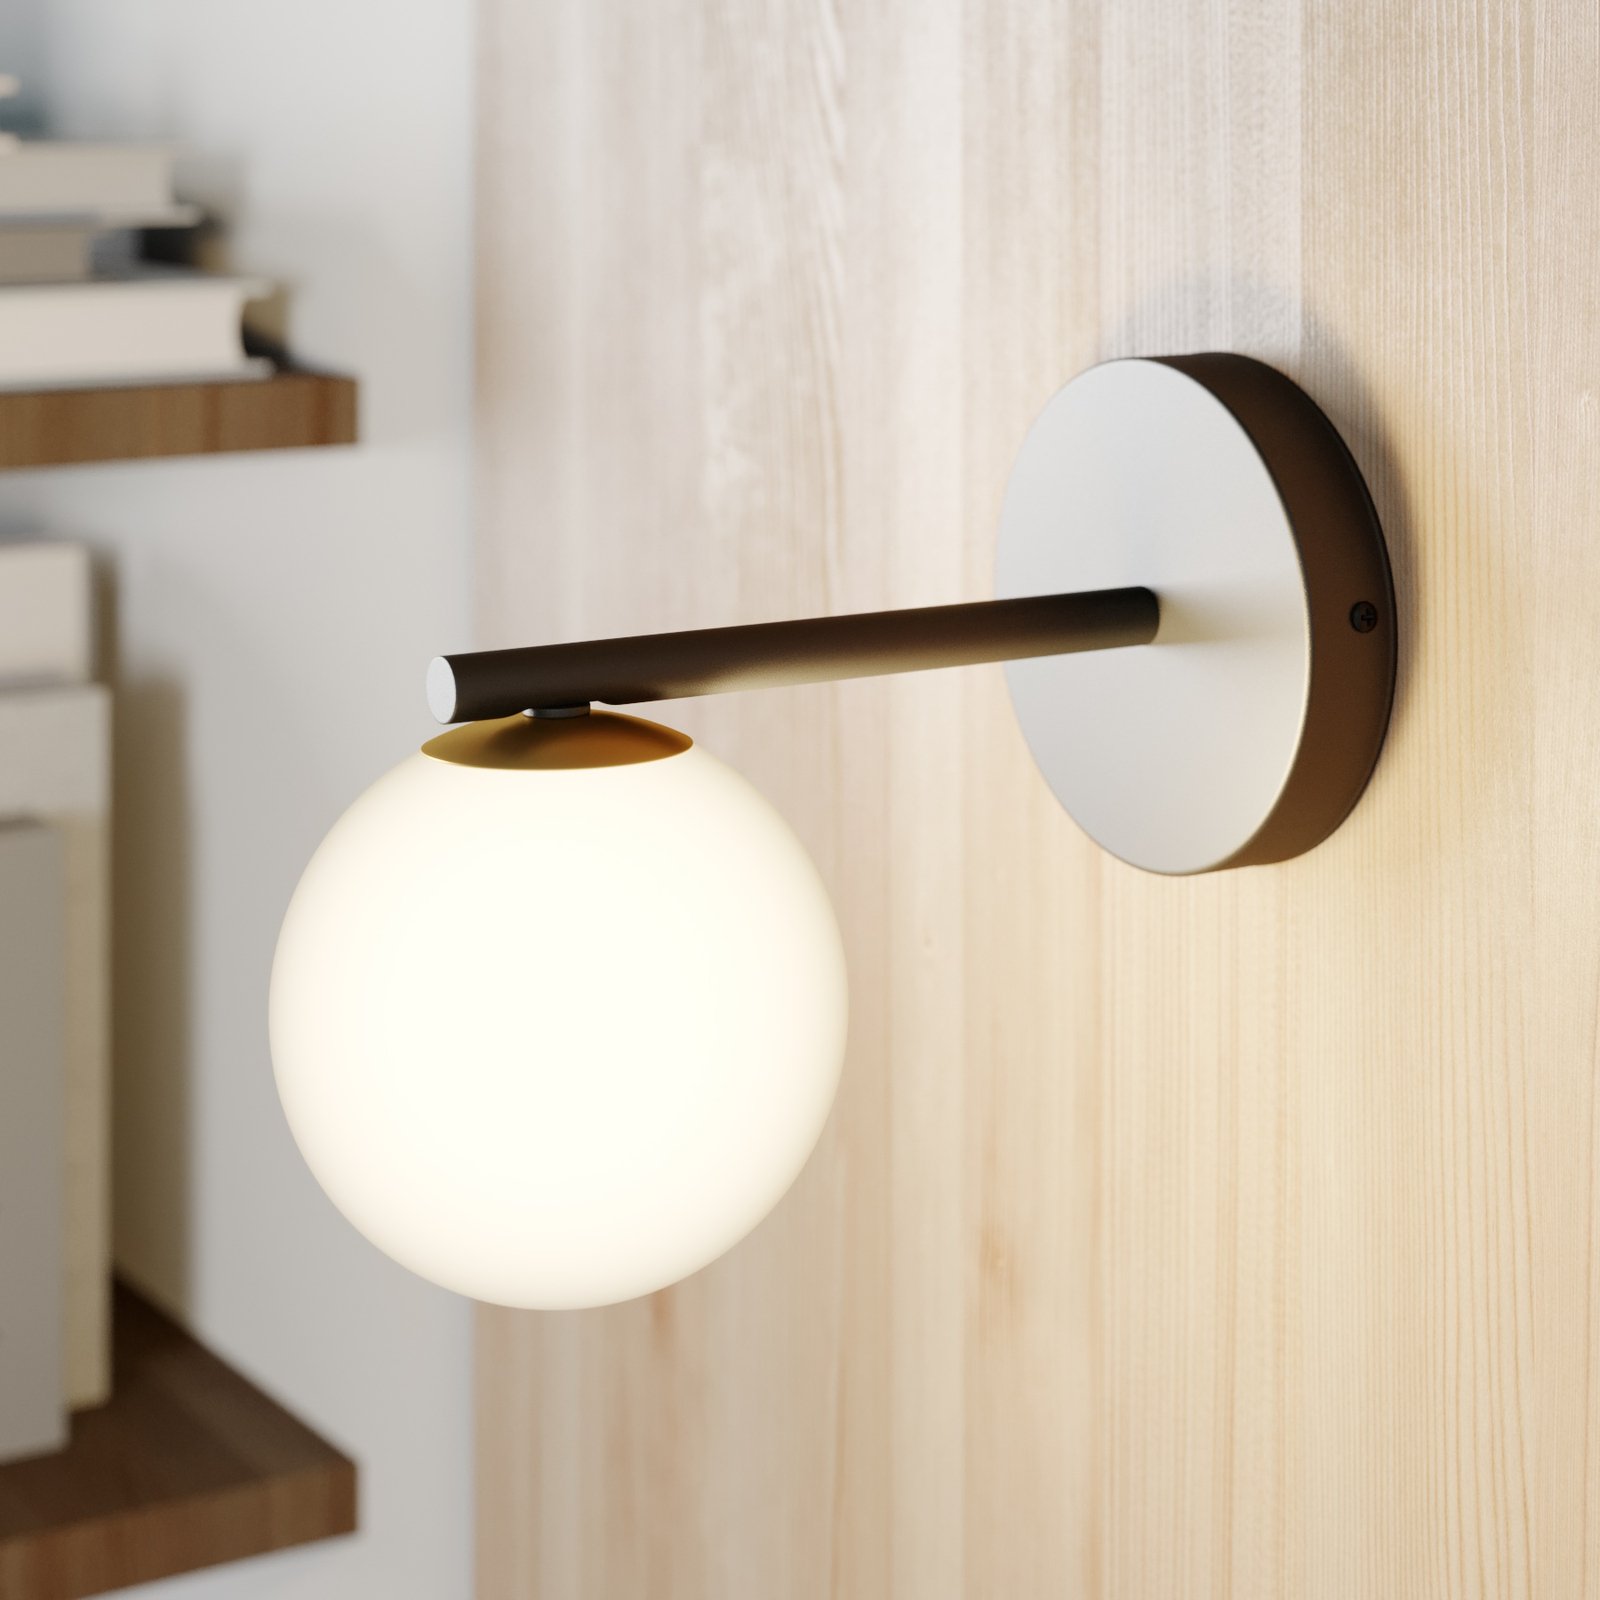 Gama wall light in black with glass globe